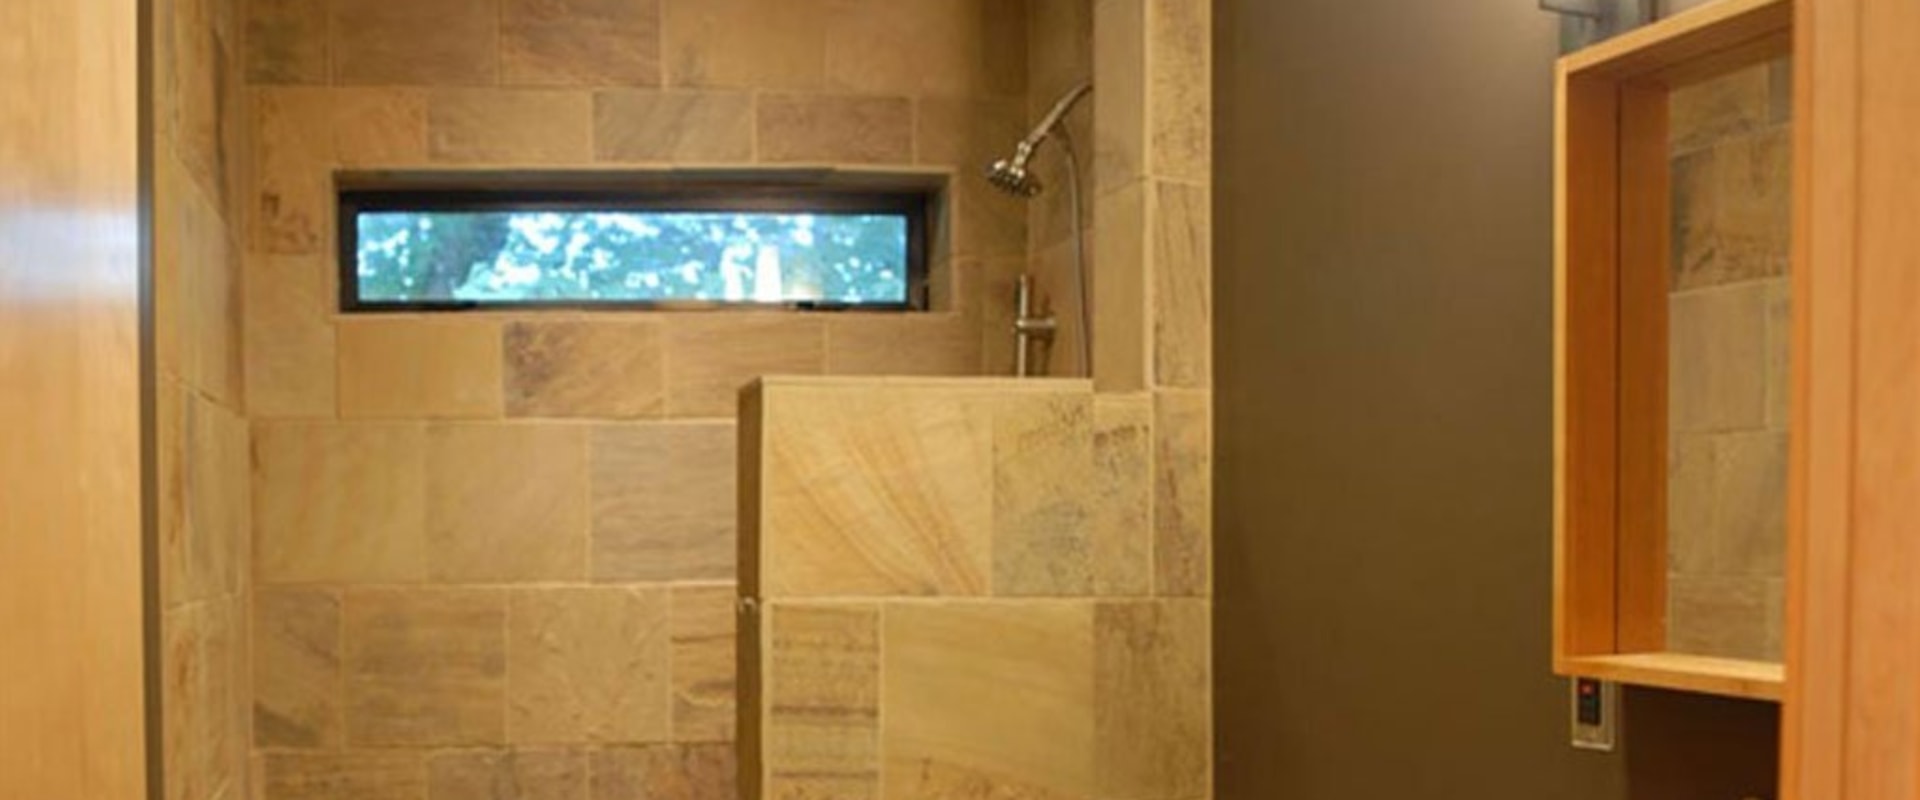 Can You Have a Shower Without a Shower Door?